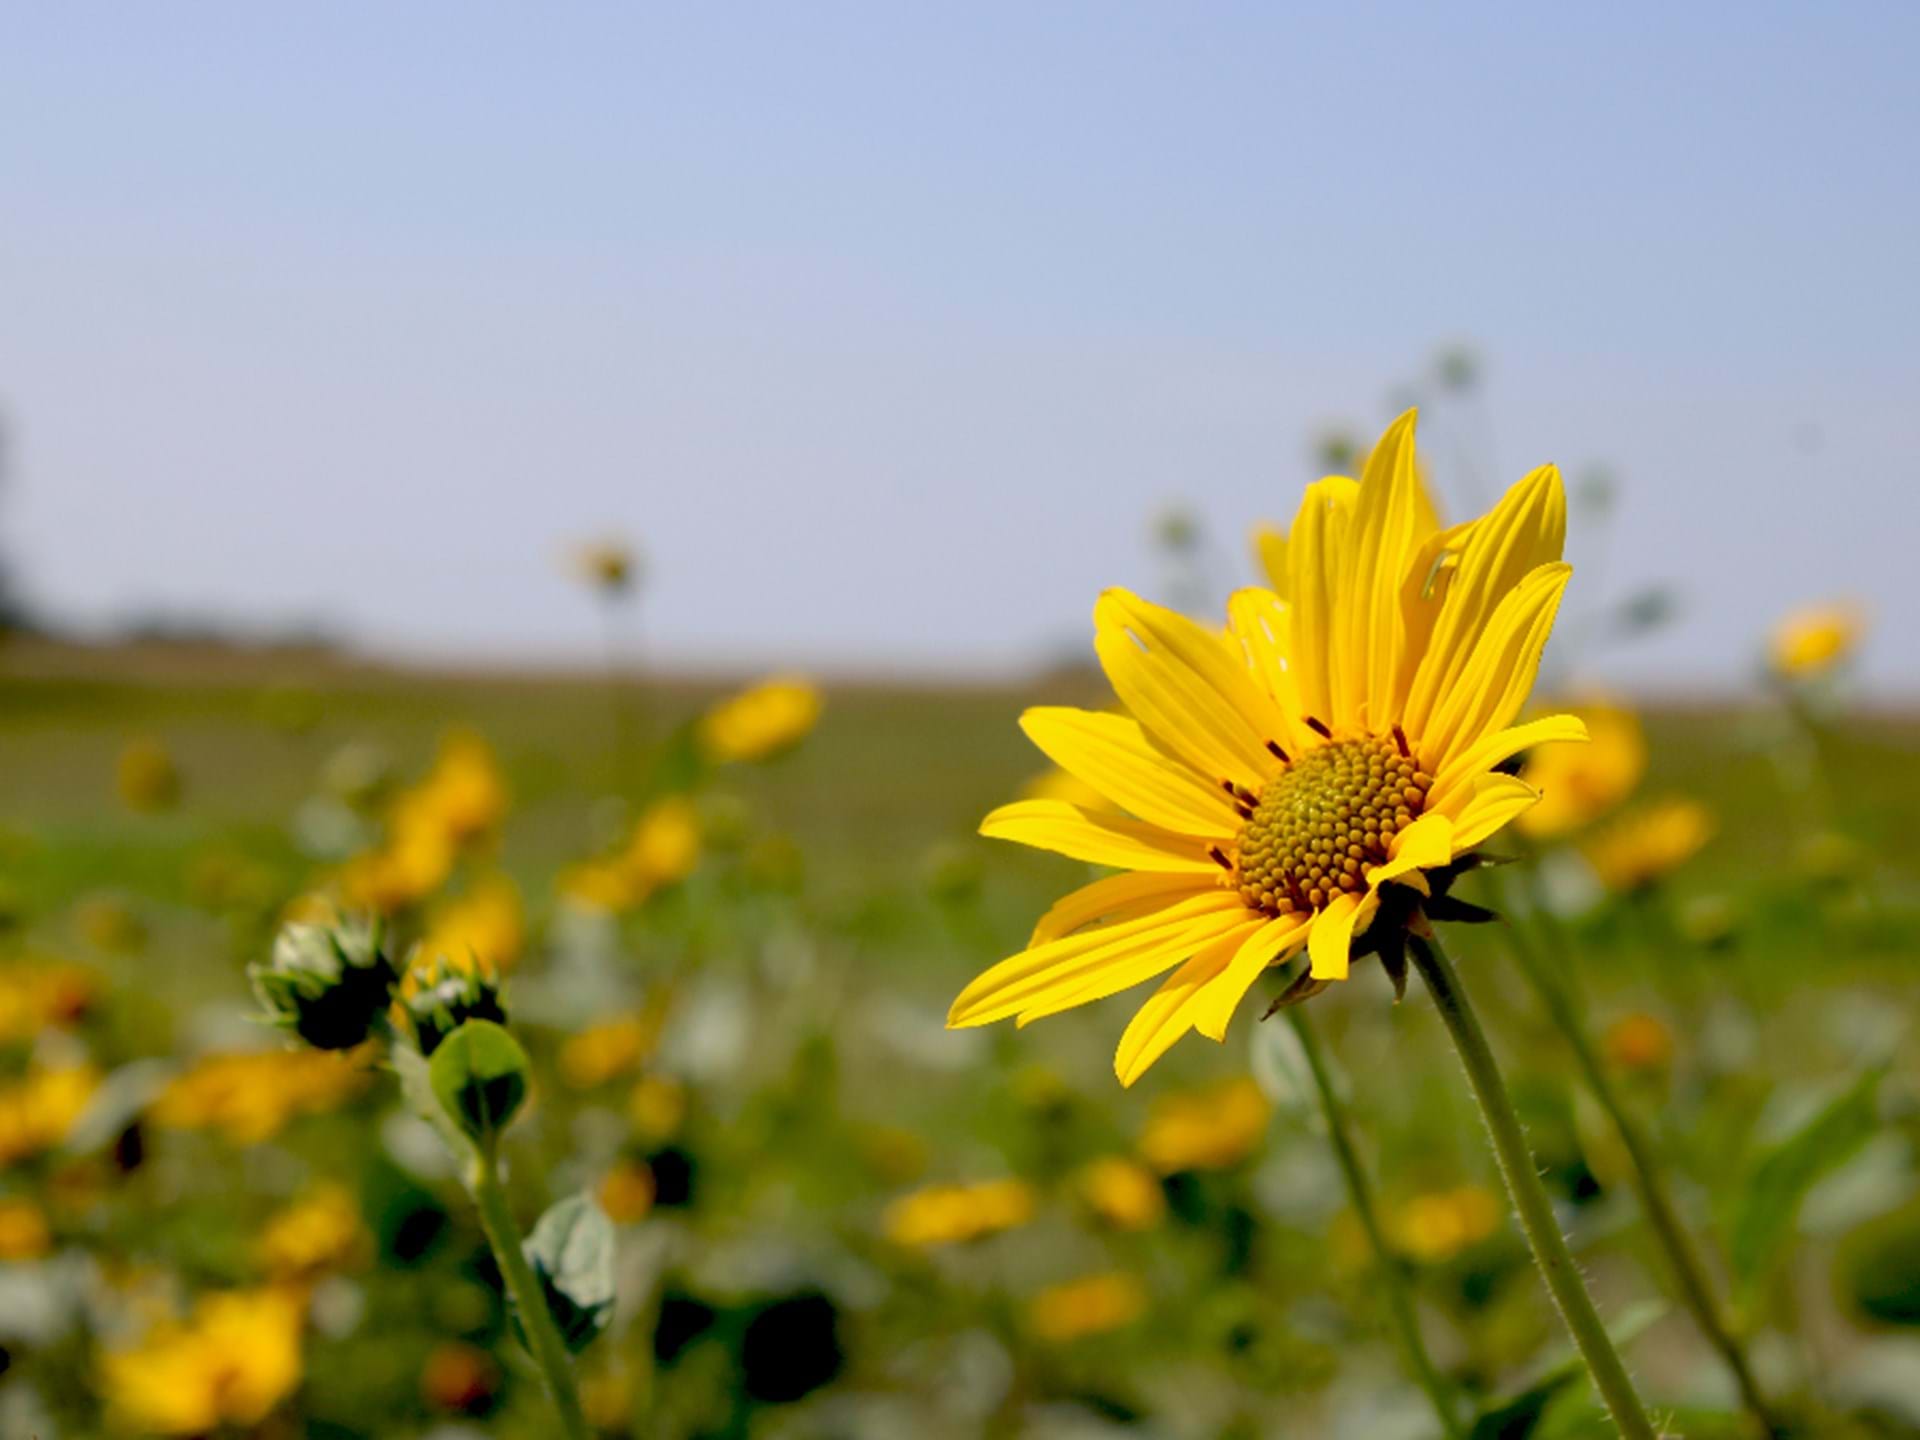 Enjoy beautiful wildflowers throughout the summer.